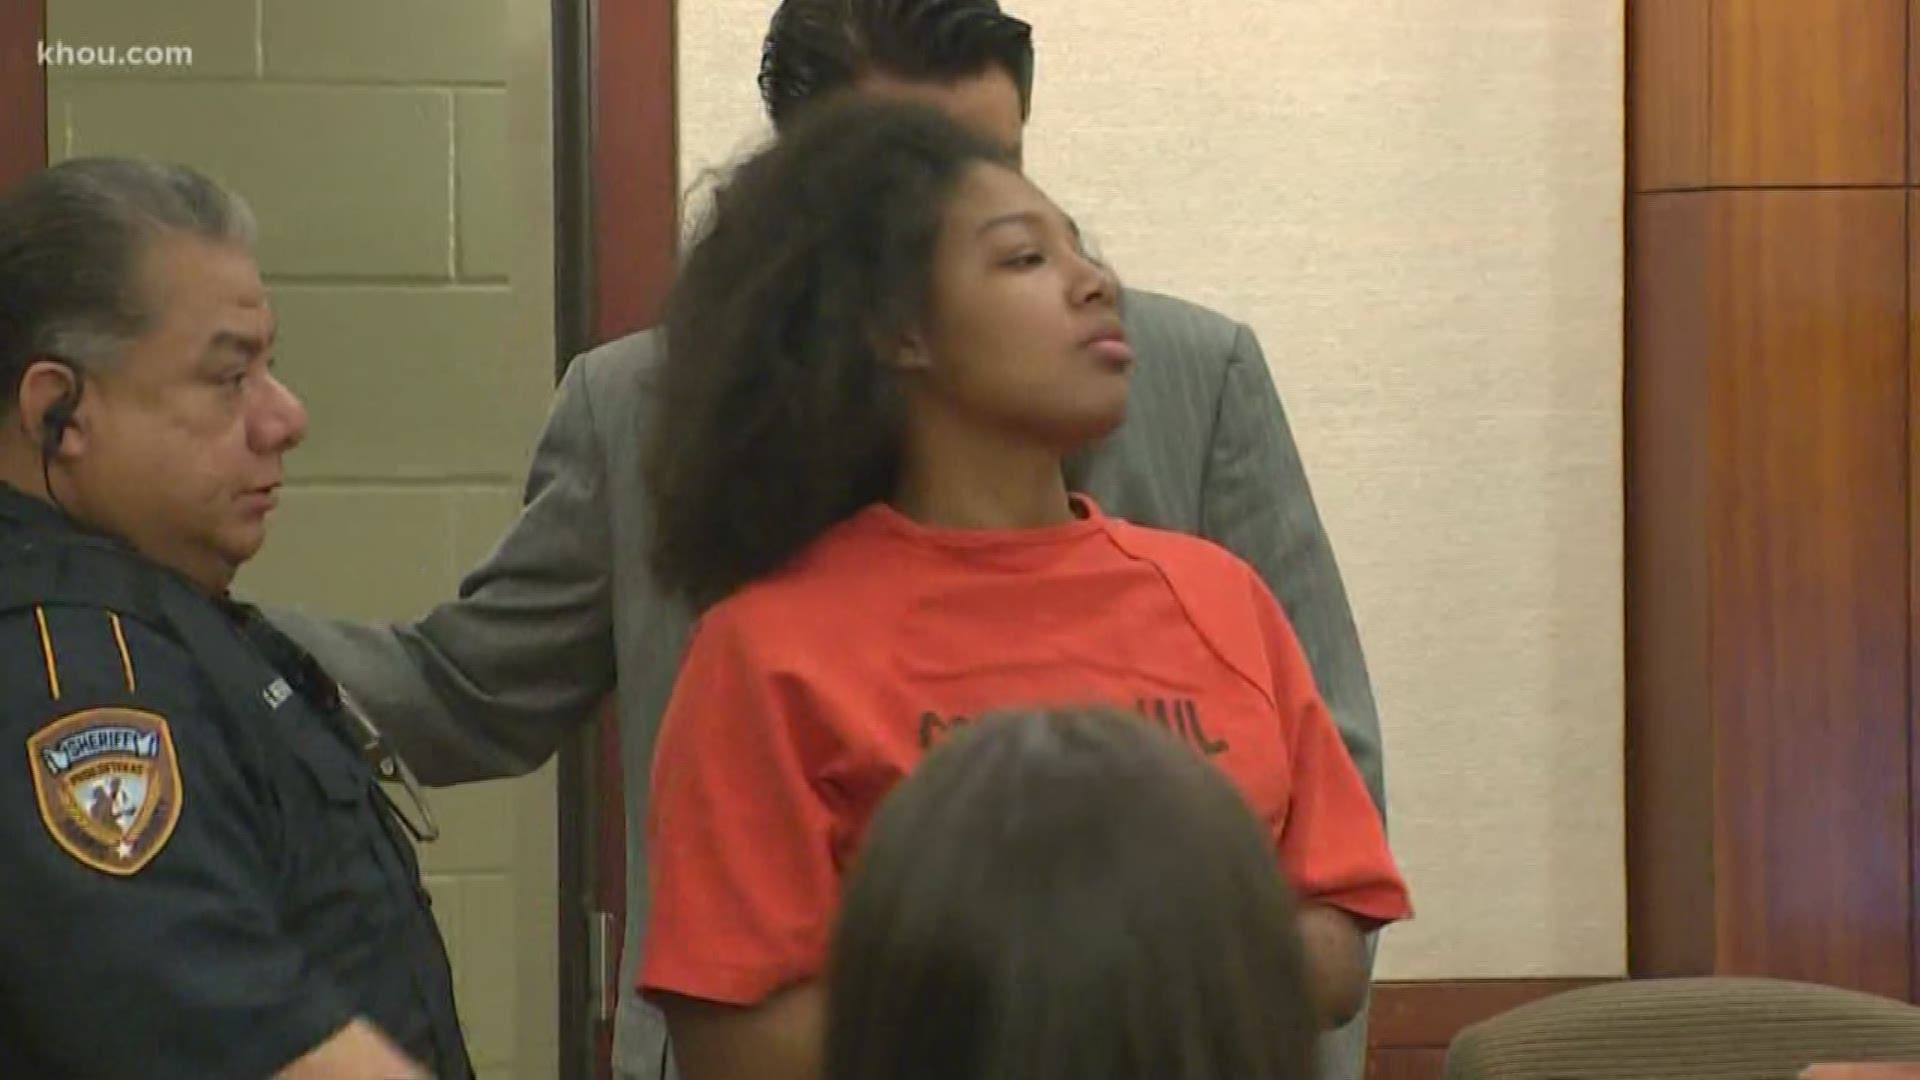 A 20-year-old woman was in court Wednesday on charges in connection with a fatal hit-and-run crash that left two people dead in the Heights last month.